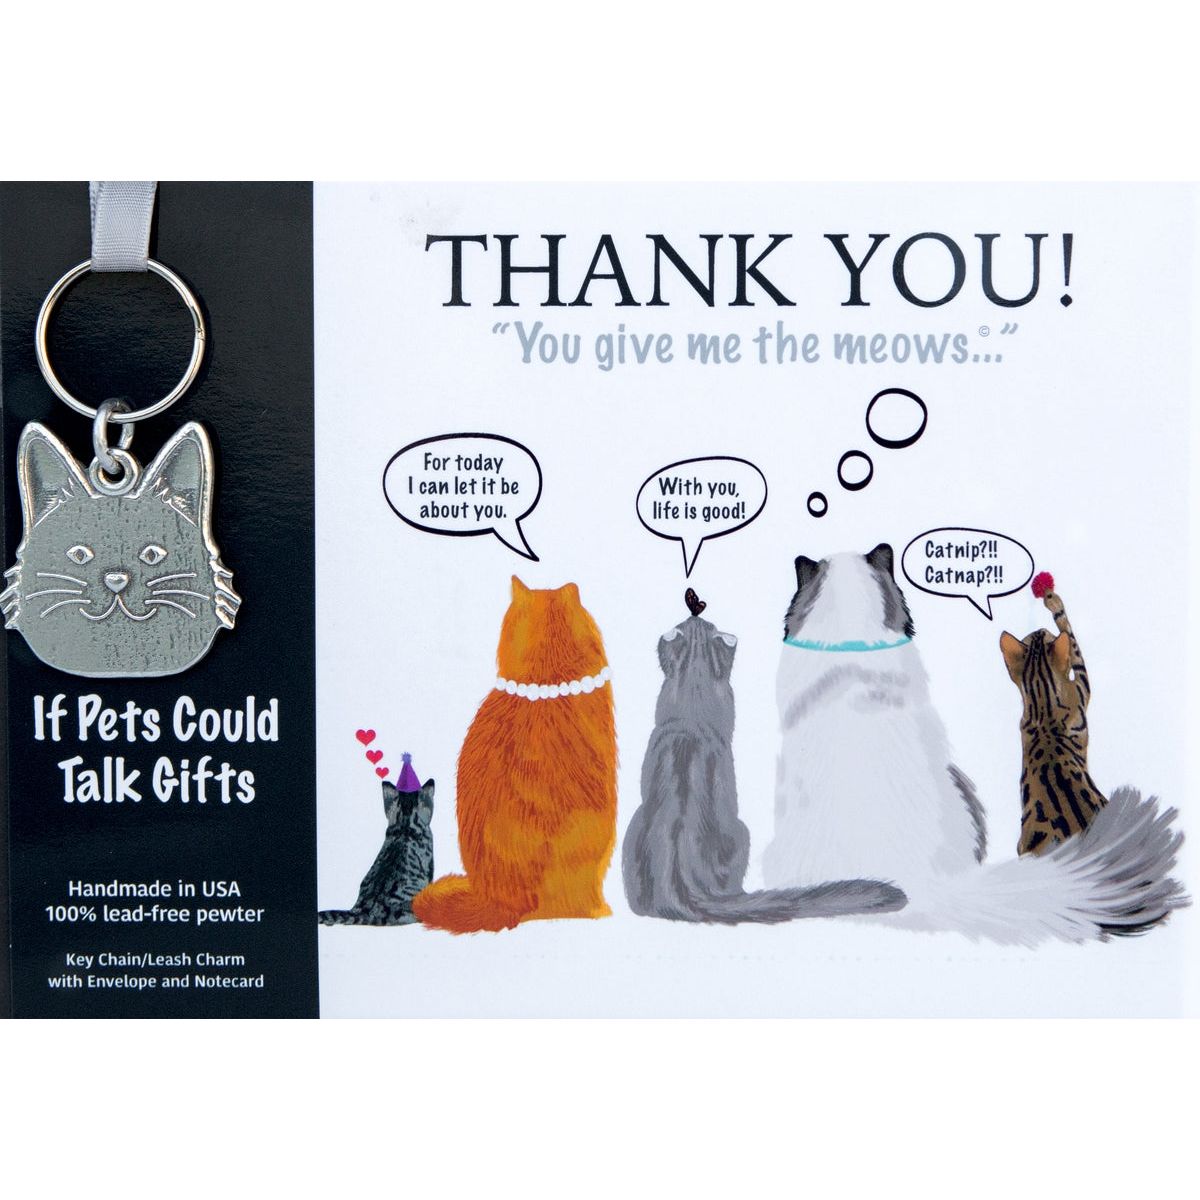 Pewter keychain in shape of a cat's face packaged with a Thank You card